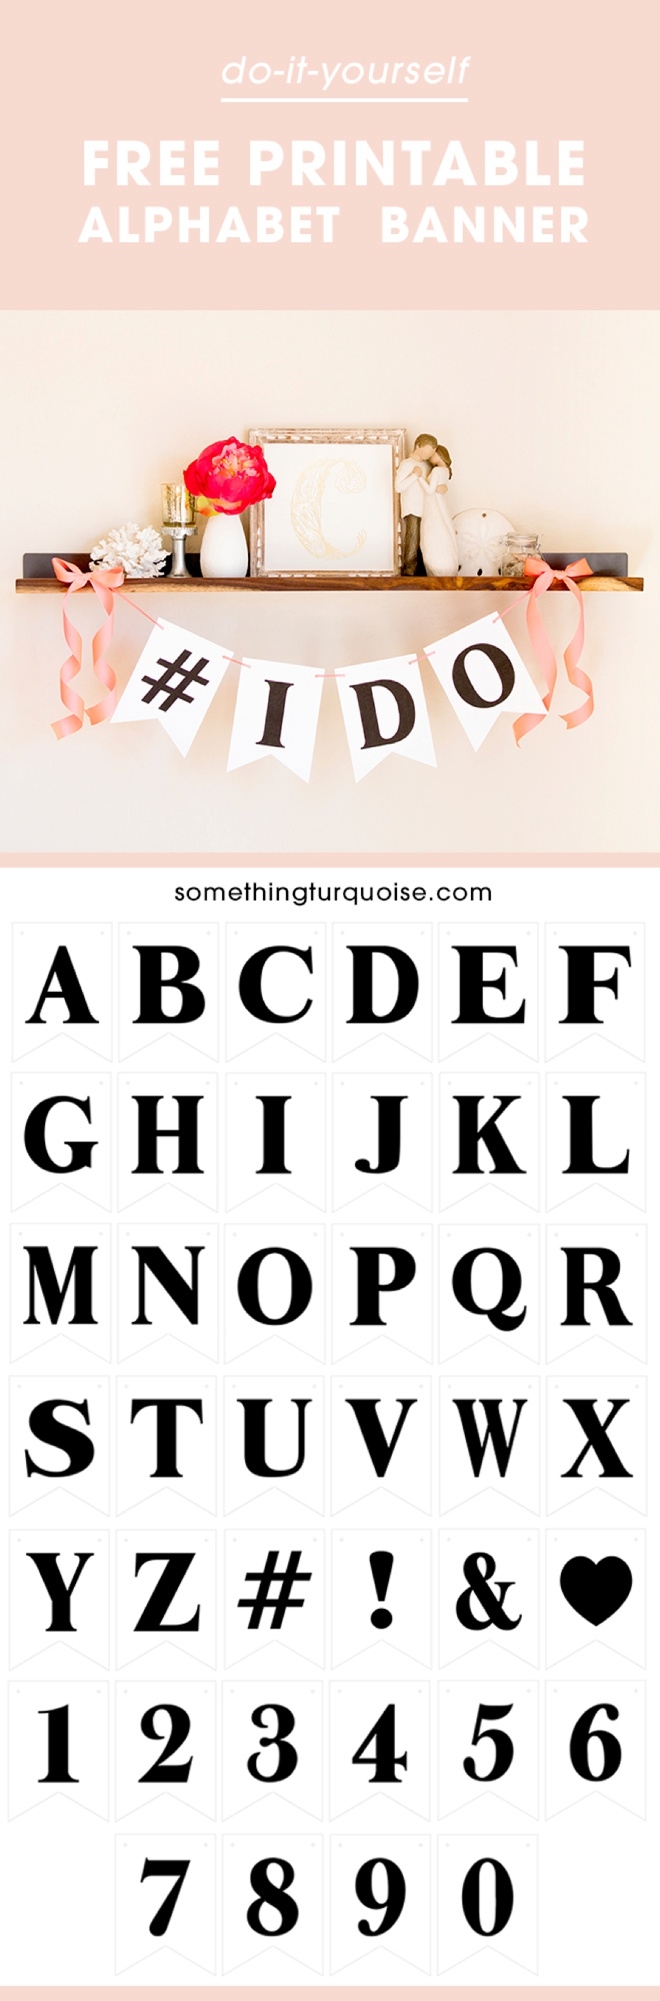 FREE Printable Alphabet And Number Banner Adorable - Free Printable Alphabet Letters For Banners